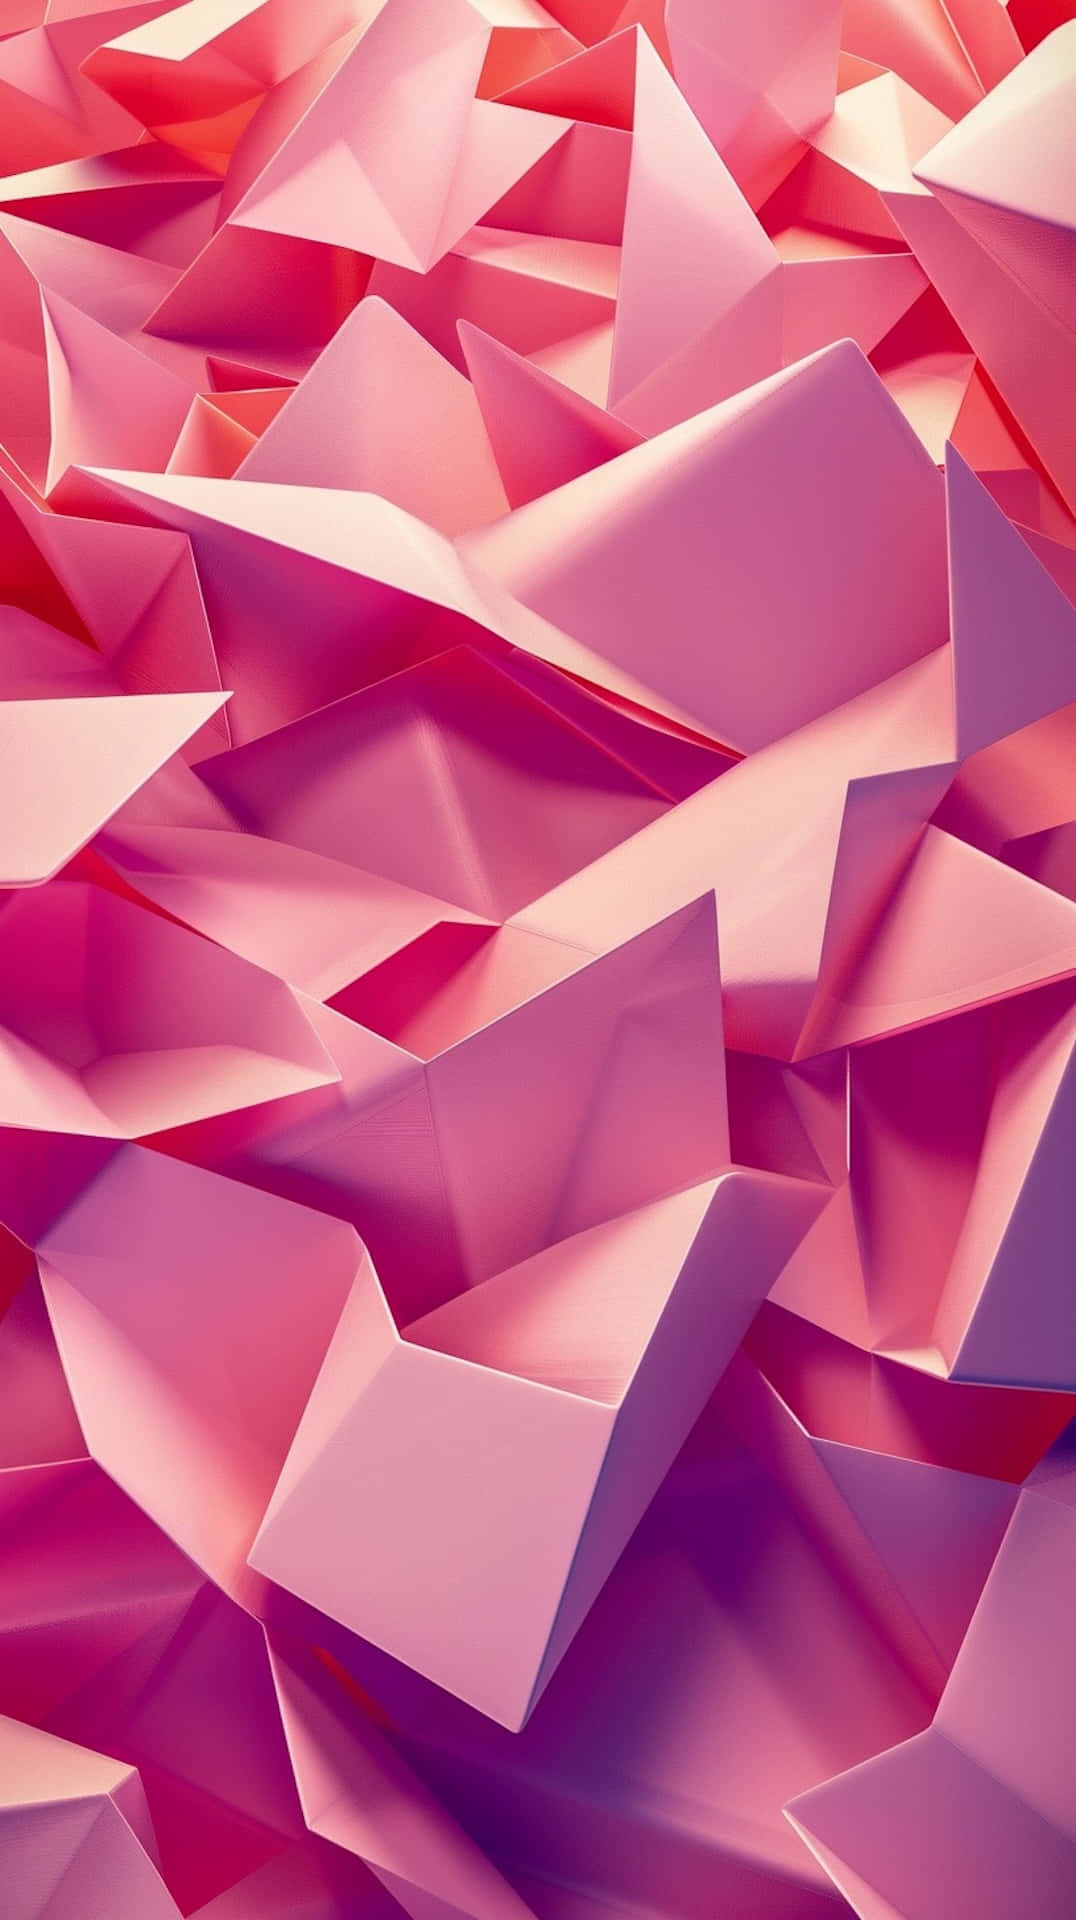 Abstract Pink3 D Geometric Shapes Wallpaper